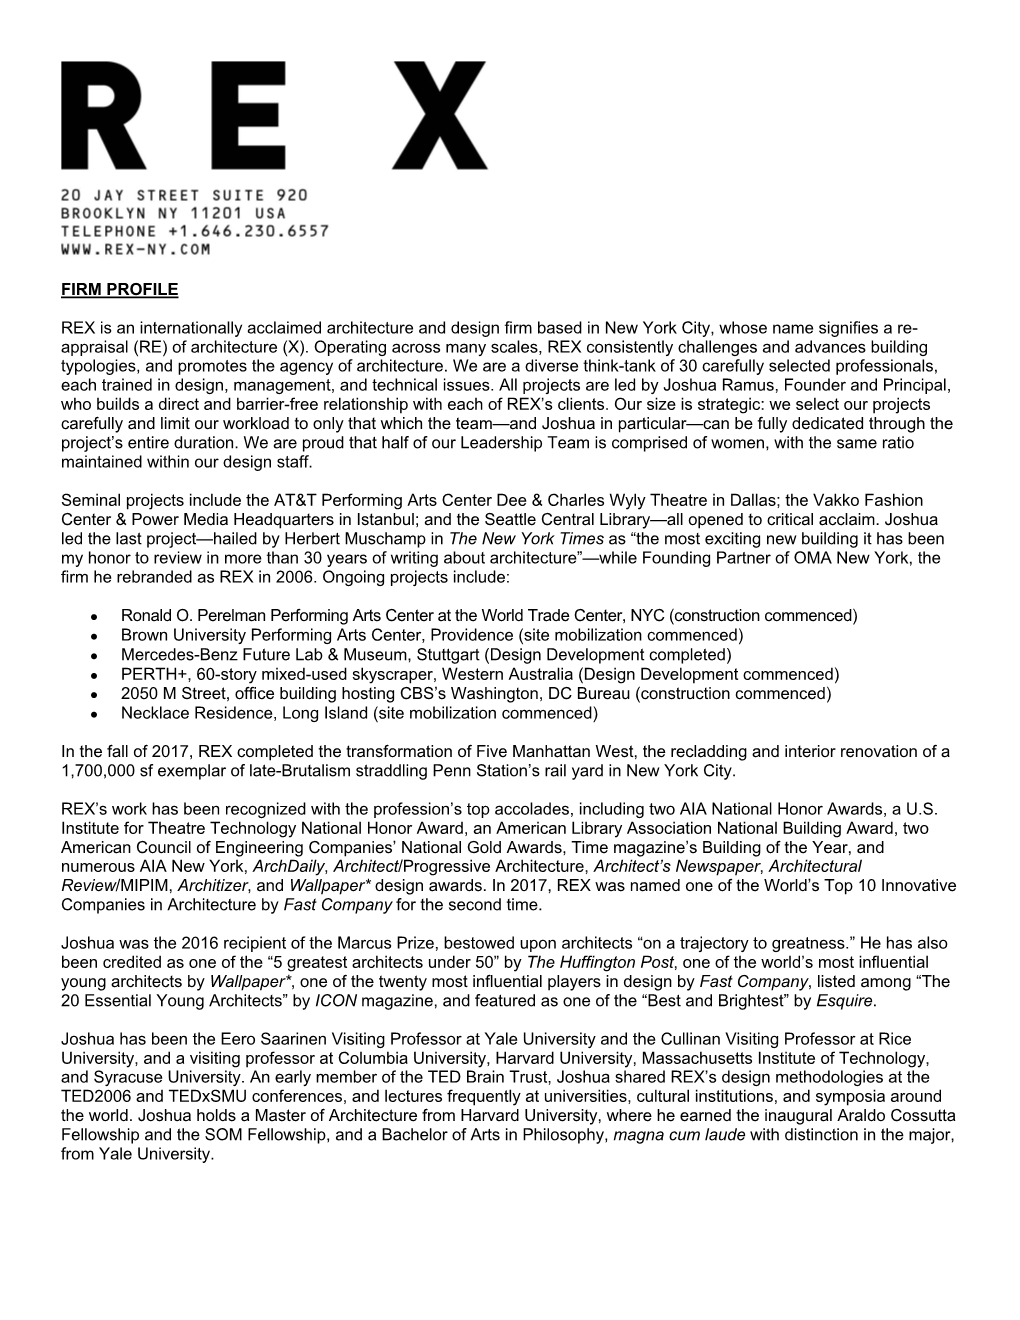 FIRM PROFILE REX Is an Internationally Acclaimed Architecture and Design Firm Based in New York City, Whose Name Signifies a Re